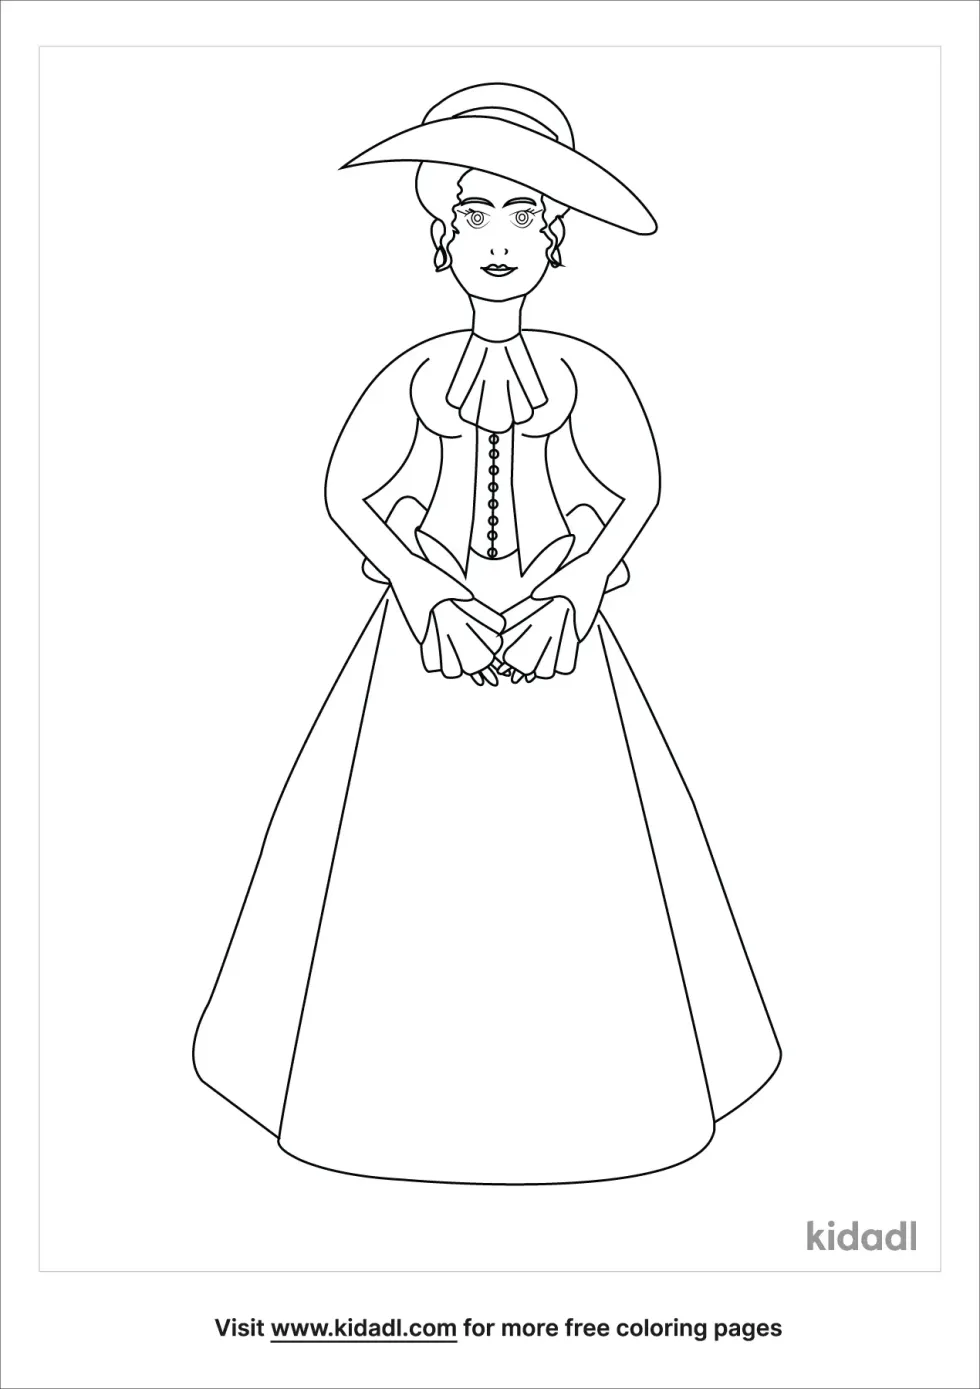 Edwardian Lady Coloring Page